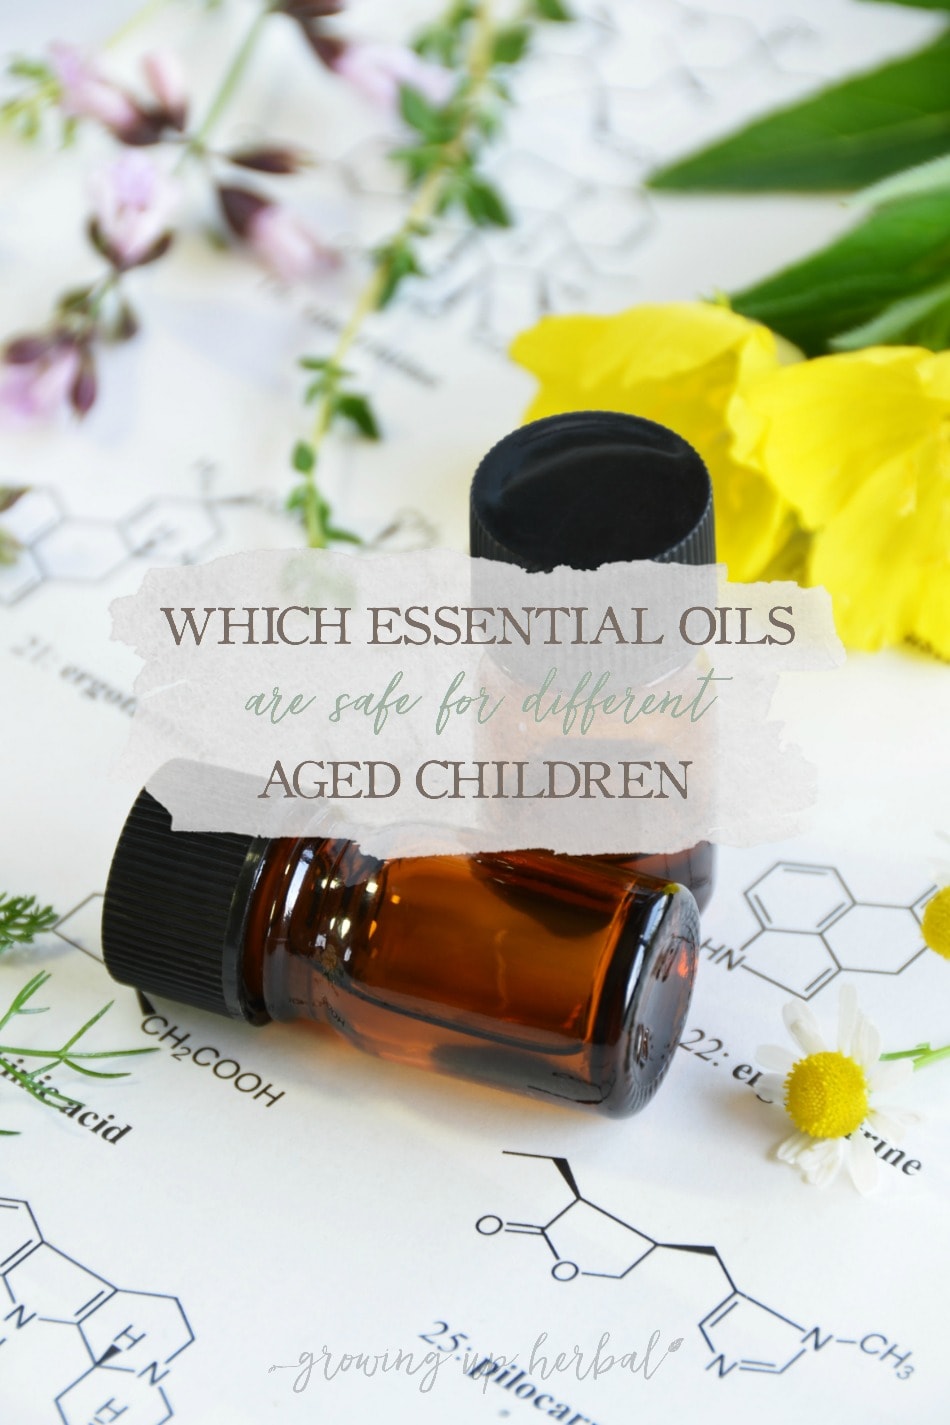 Which Essential Oils Are Safe For Different Aged Children | Growing Up Herbal | Learn which essential oils are safe for different aged children in this post!